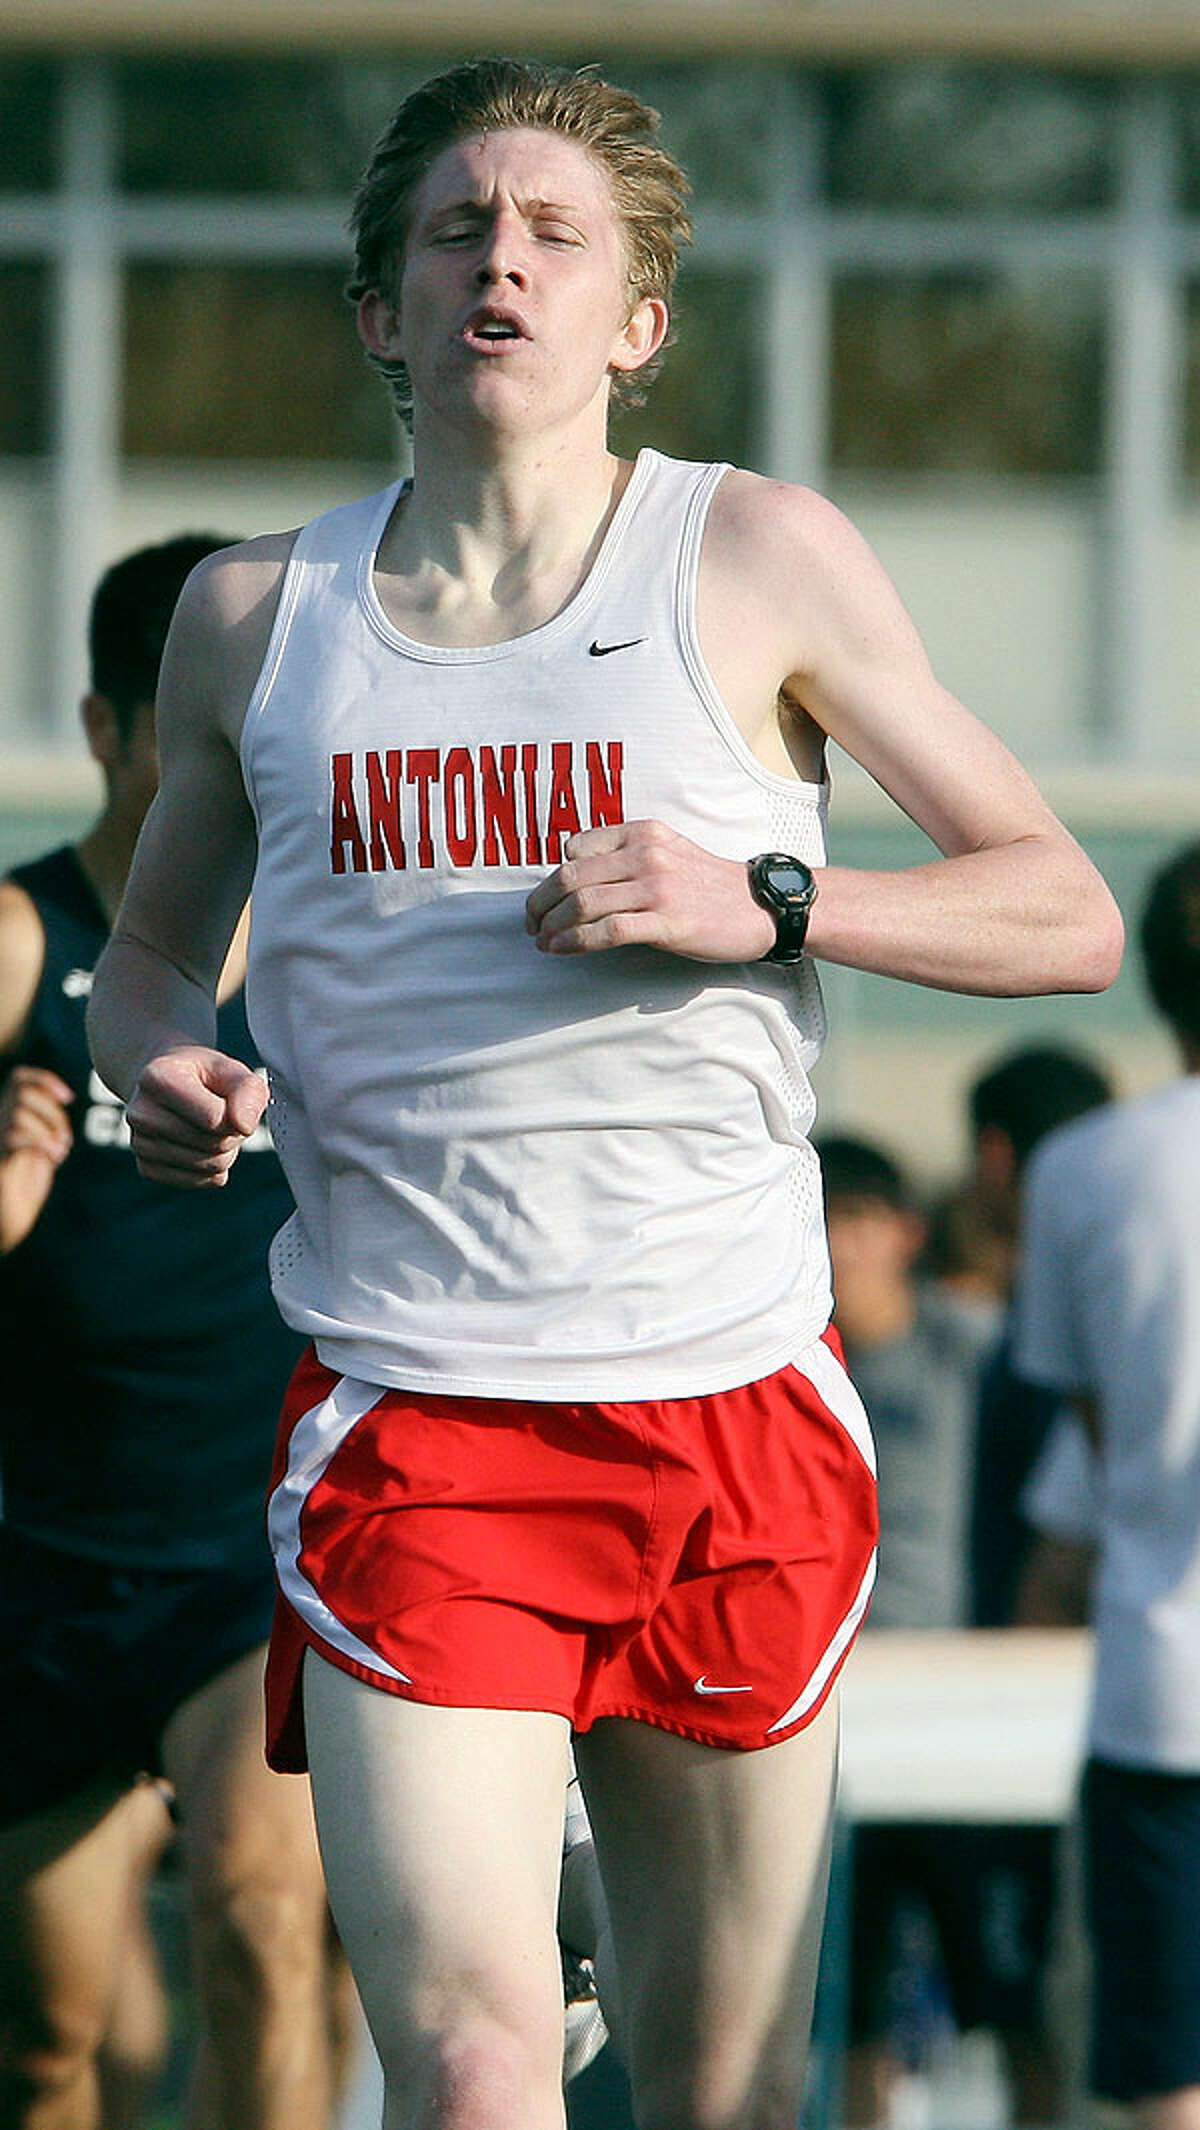 Antonian's Andrew Gazda crosses the finish line in the 800-meter run during the TAPPS 2-5A District Track Meet Thursday March 31, 2011 at Central Catholic High School. Gazda finished in first place.  EDWARD A. ORNELAS/eaornelas@express-news.net)